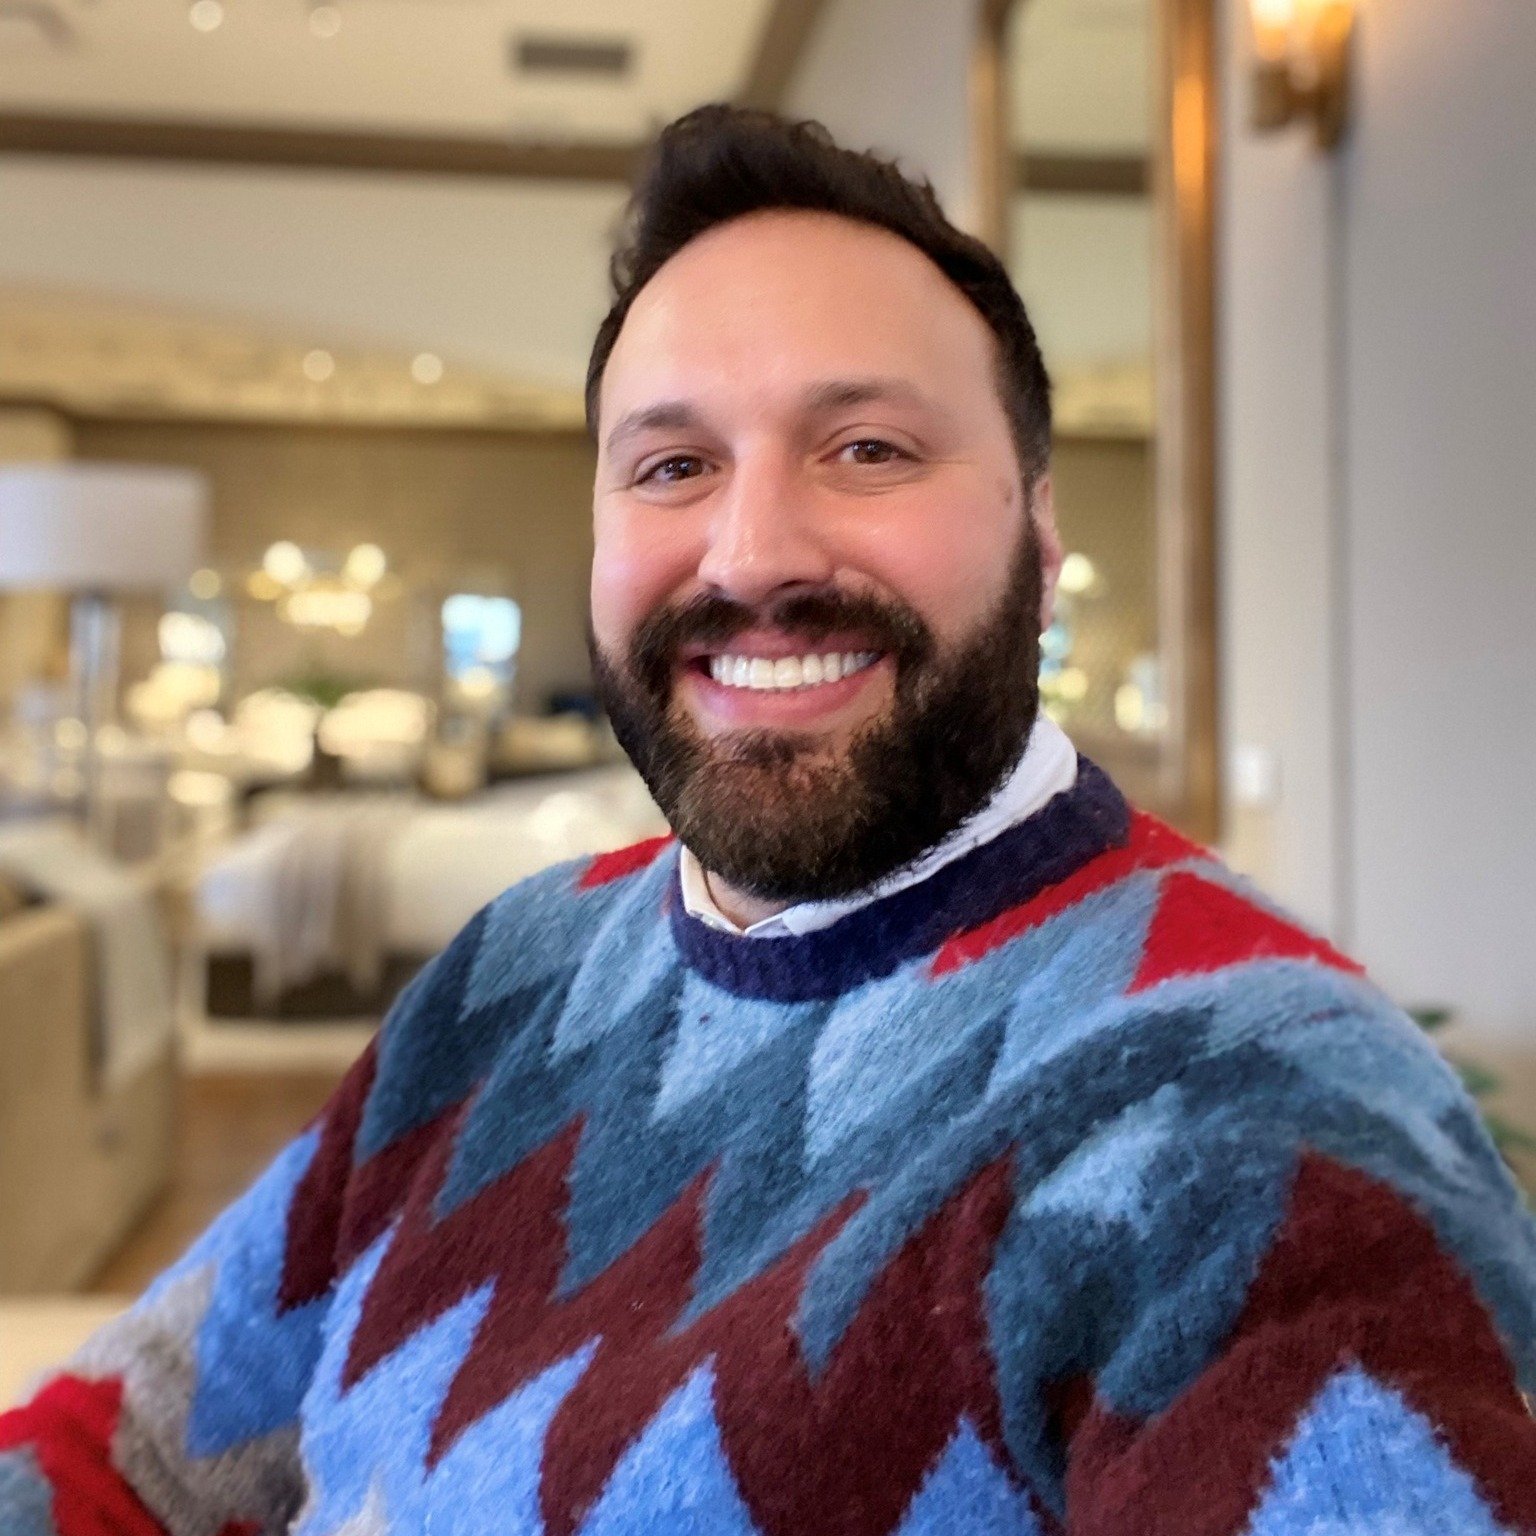 Check out my new instagram for my role at Arhaus @PLDesignArhausMKE

I'm excited to announce my new role as Interior Designer for Arhaus Furniture in Brookfield! This new role dovetails with my private design work as well, so I'll continue to offer d